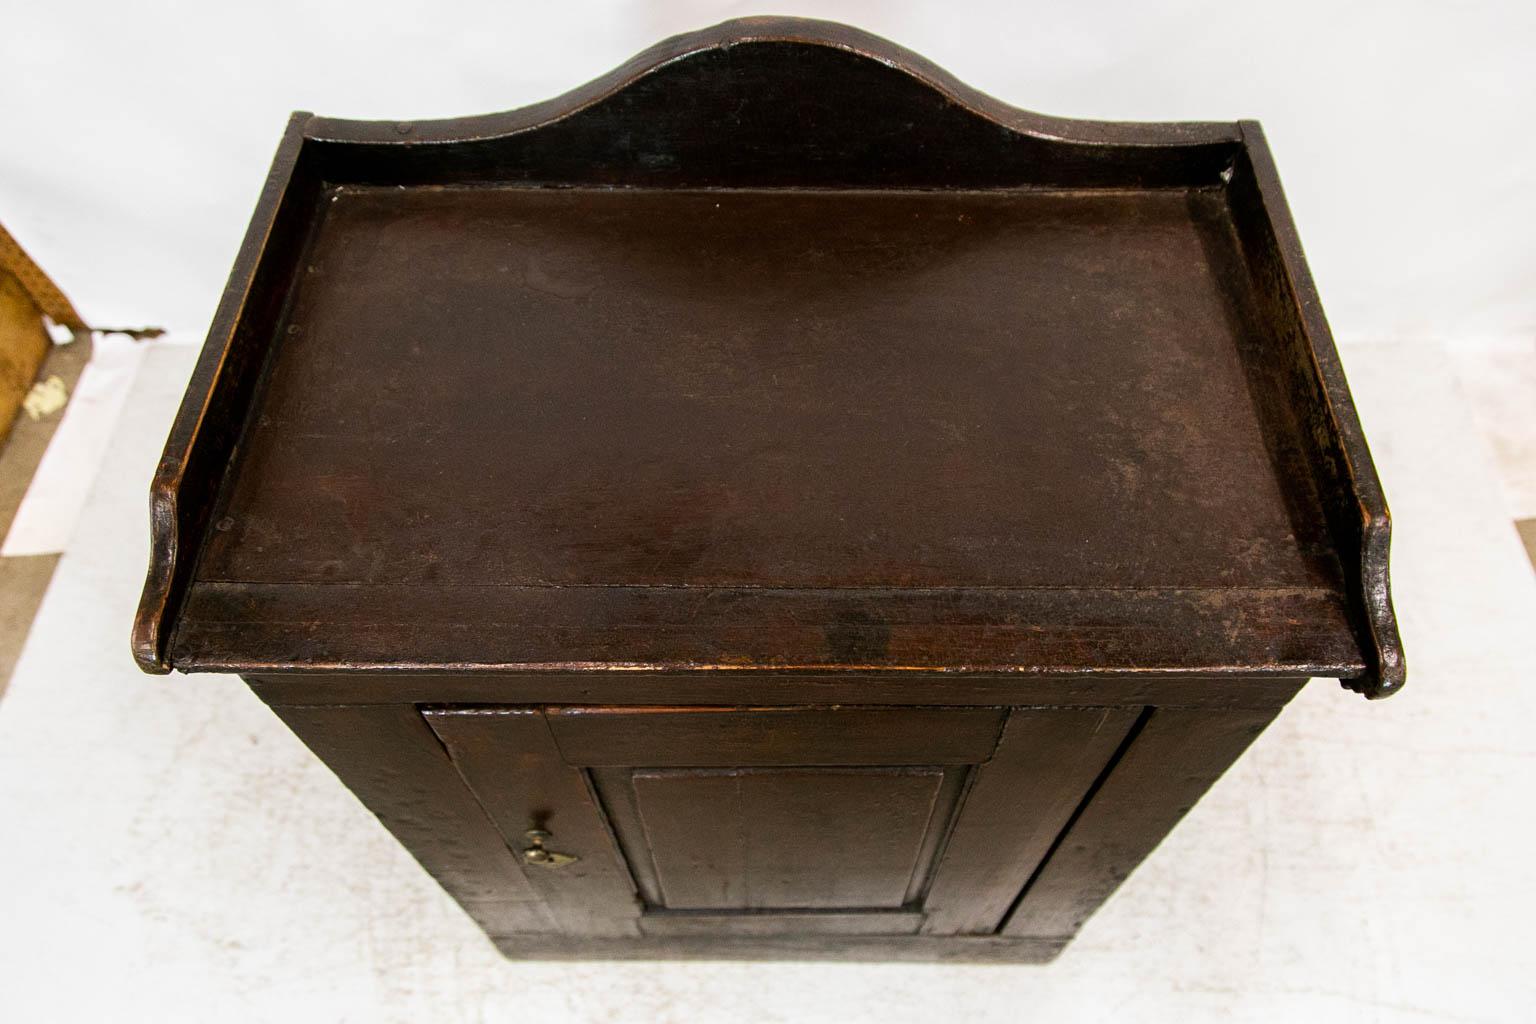 The top of this washstand has a shaped gallery on three sides. The door has a raised panel. There are small shrinkage separations in the top door and sides. The paint has wear and crazing commensurate with use and age. The interior has one fixed